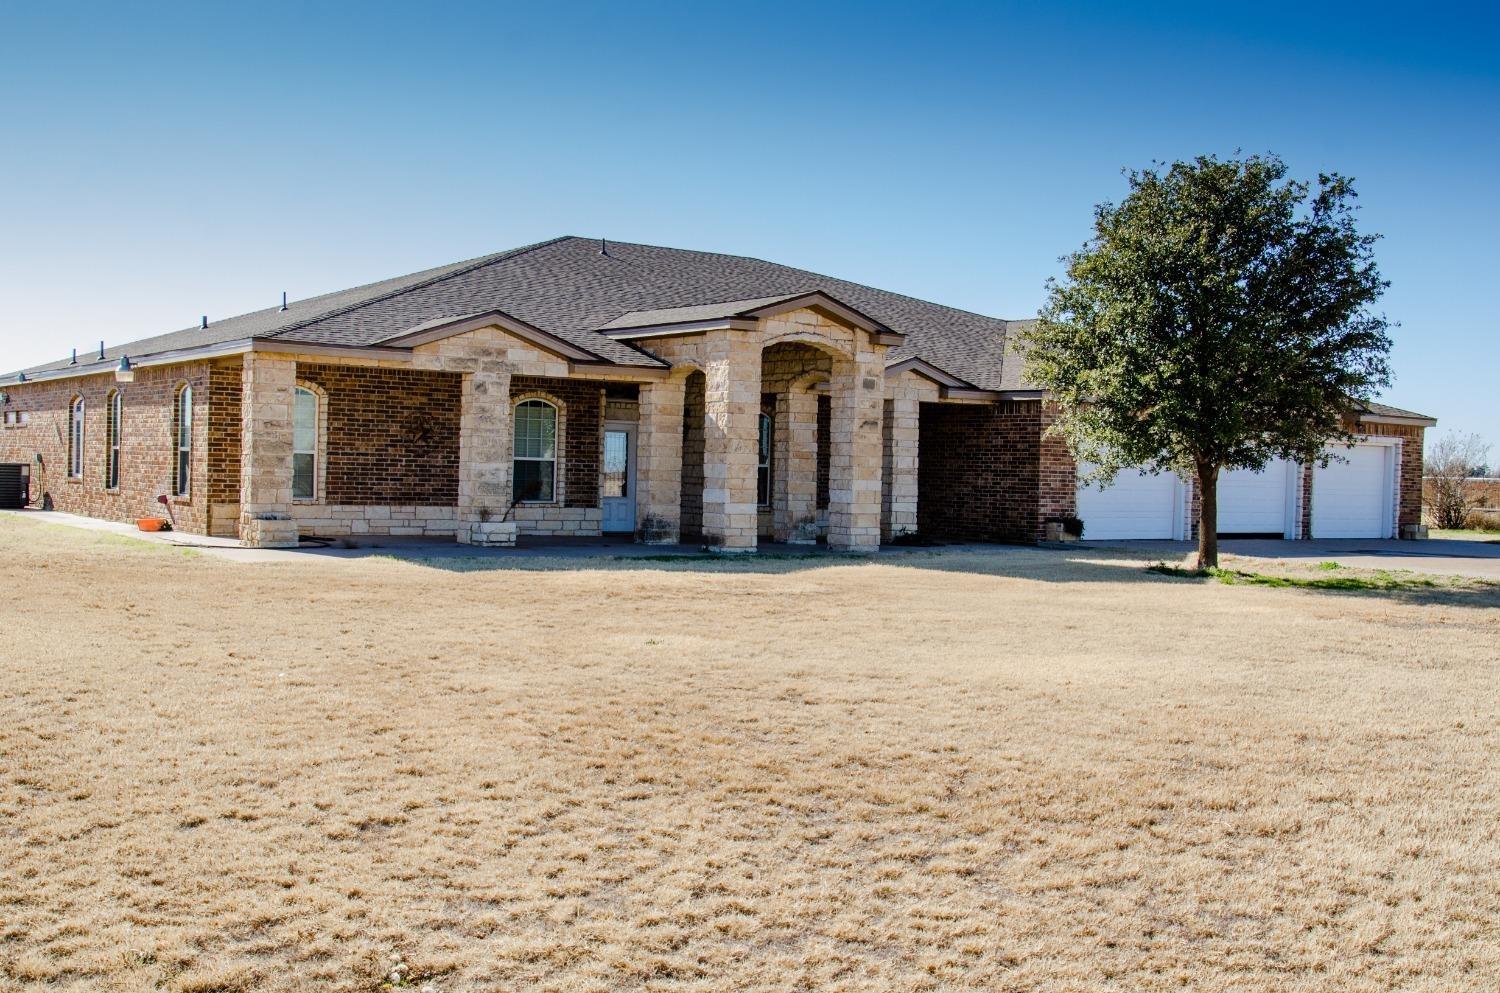 Plenty of room to roam. Located in Witharral ISD on 2.8 acres this beautiful 3br/4ba/3cargarage home with over 6000sq ft. The kitchen has beautiful custom cabinets, granite countertops, a Jennaire cooktop, and built-in double ovens. Two dining areas, one adjoins the kitchen, and one is in a separate dining room. There are two living areas with wood-burning fireplaces, Master suite has a separate bath and shower, and his and hers vanity sinks. Walk-in master closet with concealed private office behind closet cabinets with a passage door to the back patio. Bedroom #2 can be 2nd master with its private bath and walk-in closet. Large #3 bedroom also has a private bath and patio doors that look out to the backyard. Below are two basements for those stormy nights or overflow of guests. Oversize 3-car garage with freezer space, storage closet, and drop-down attic access. Sprinkler system, a water well, city water too, and a septic system. Small stalls for animals inside the pens,